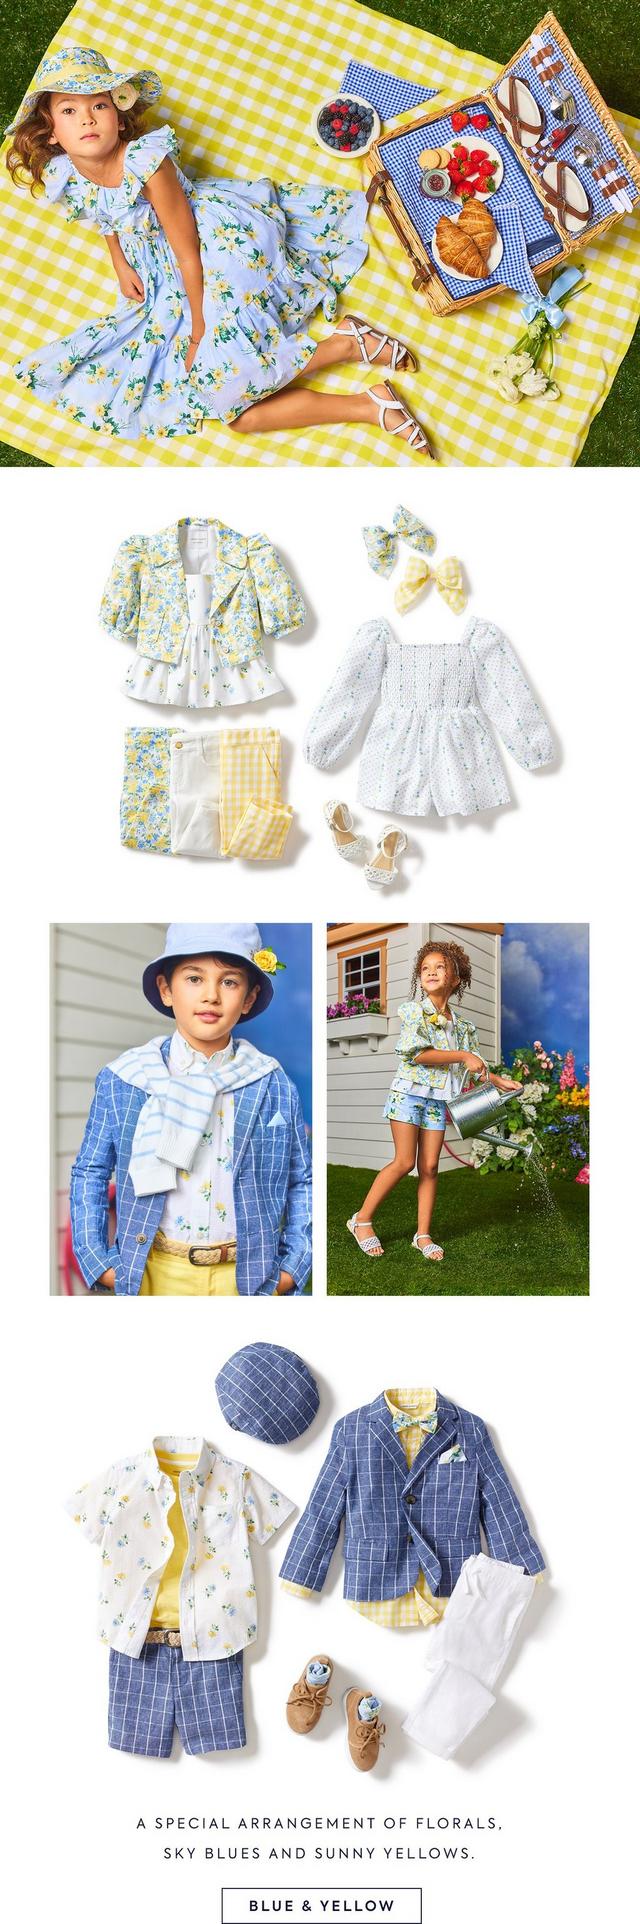 A special arrangement of florals, sky blues and sunny yellows. Shop blue & yellow family matching for girl, boy, baby and tween.